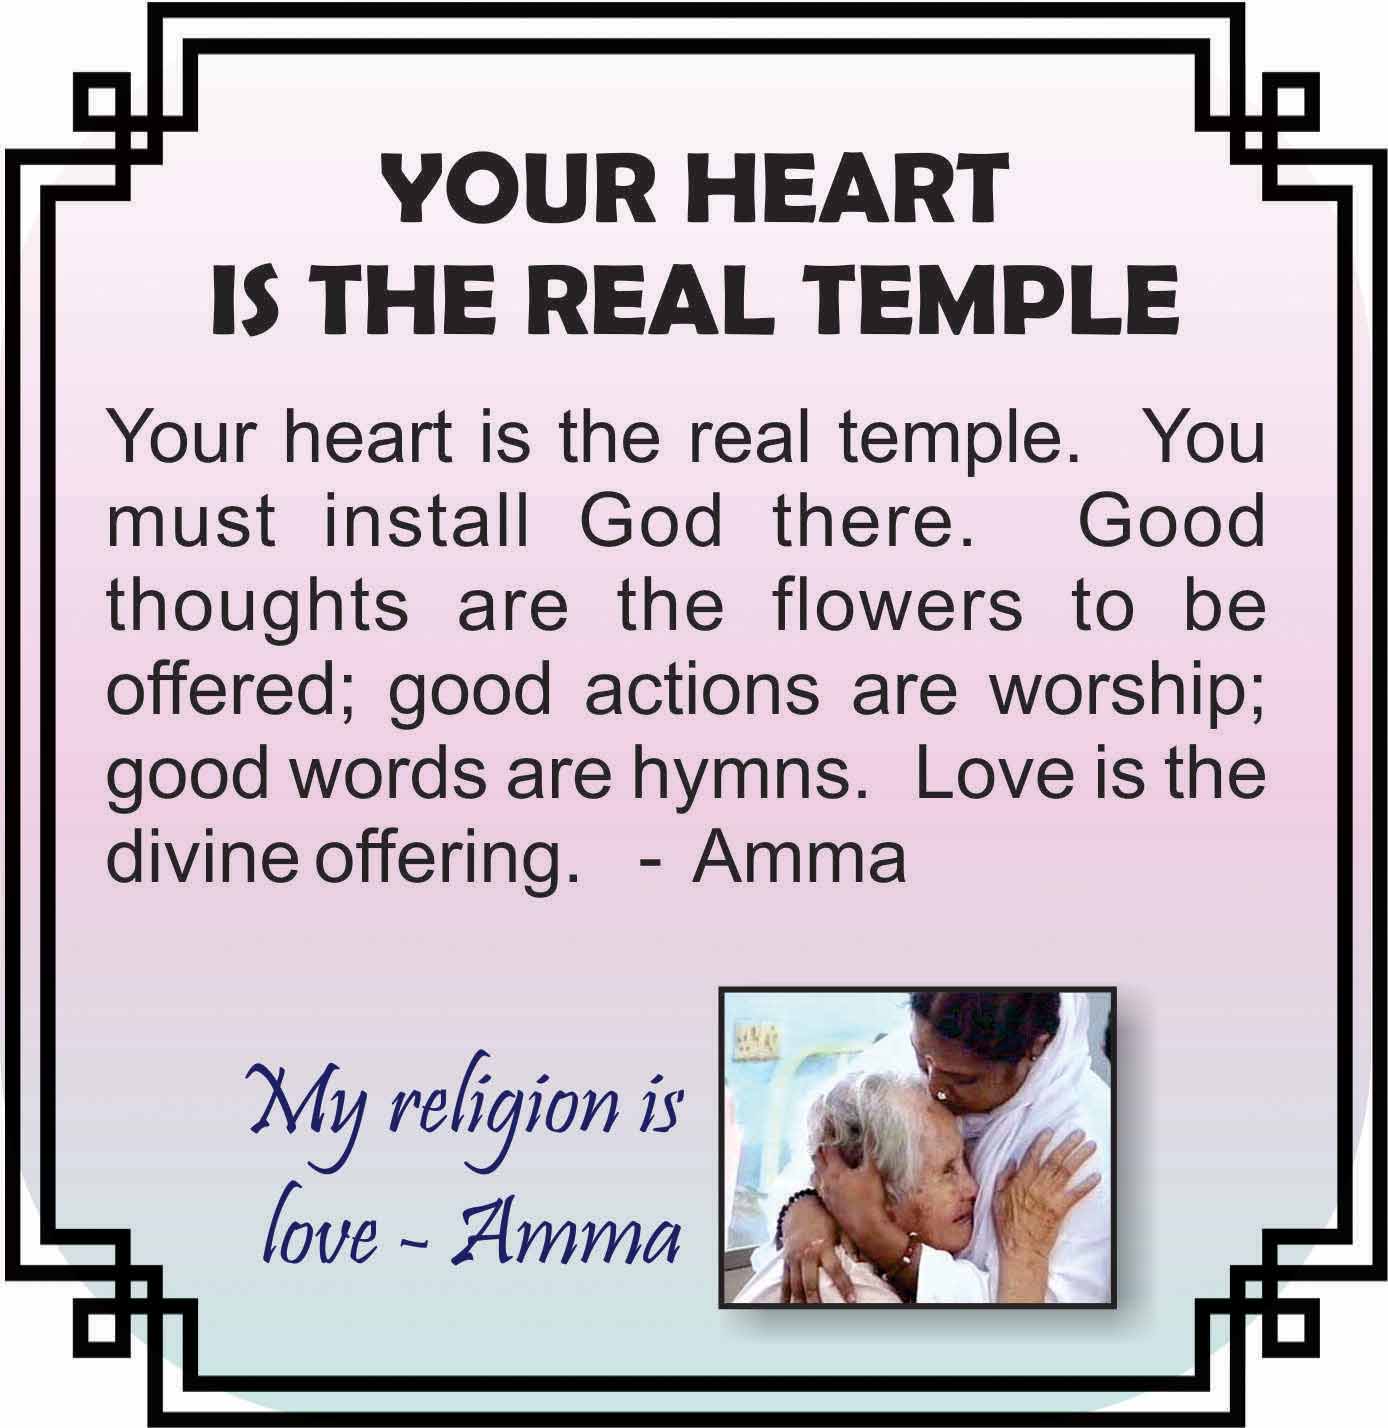 The heart is the temple